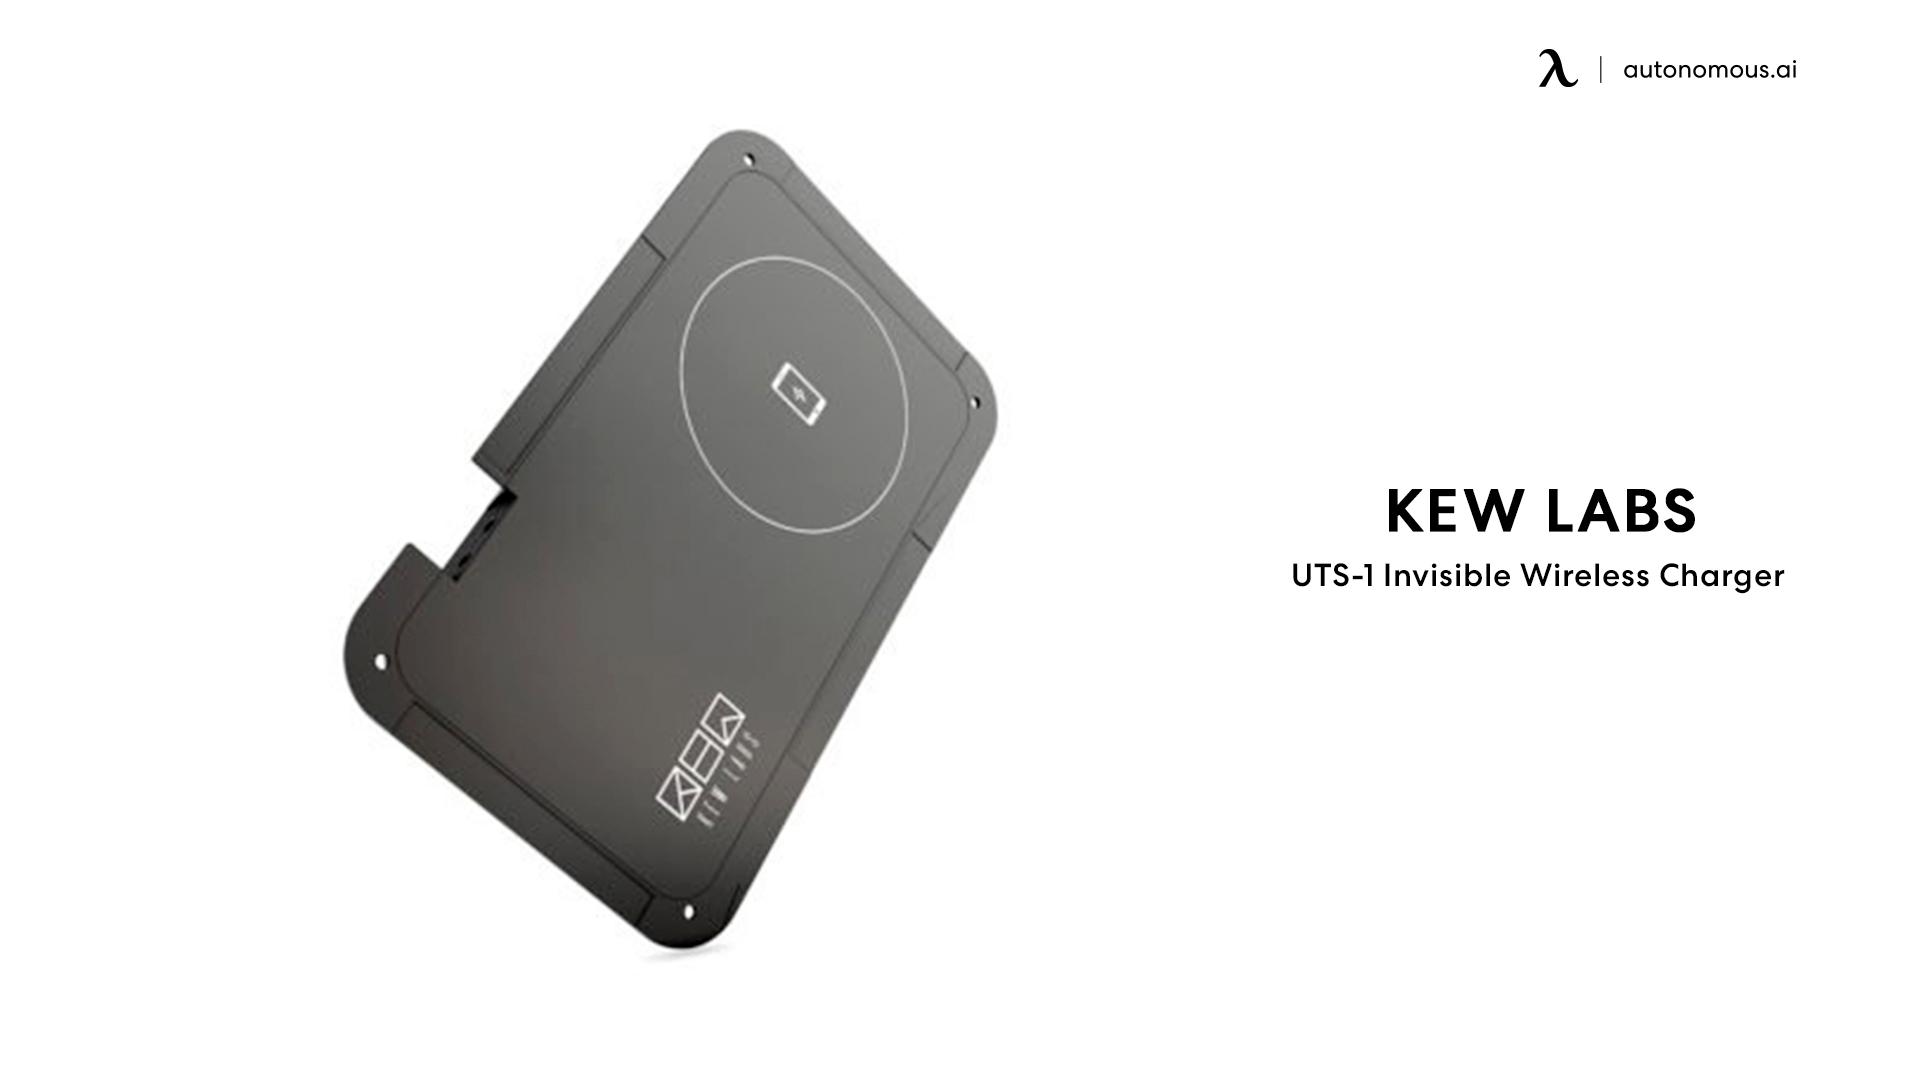 UTS-1 Invisible Wireless Charger from Kew Labs